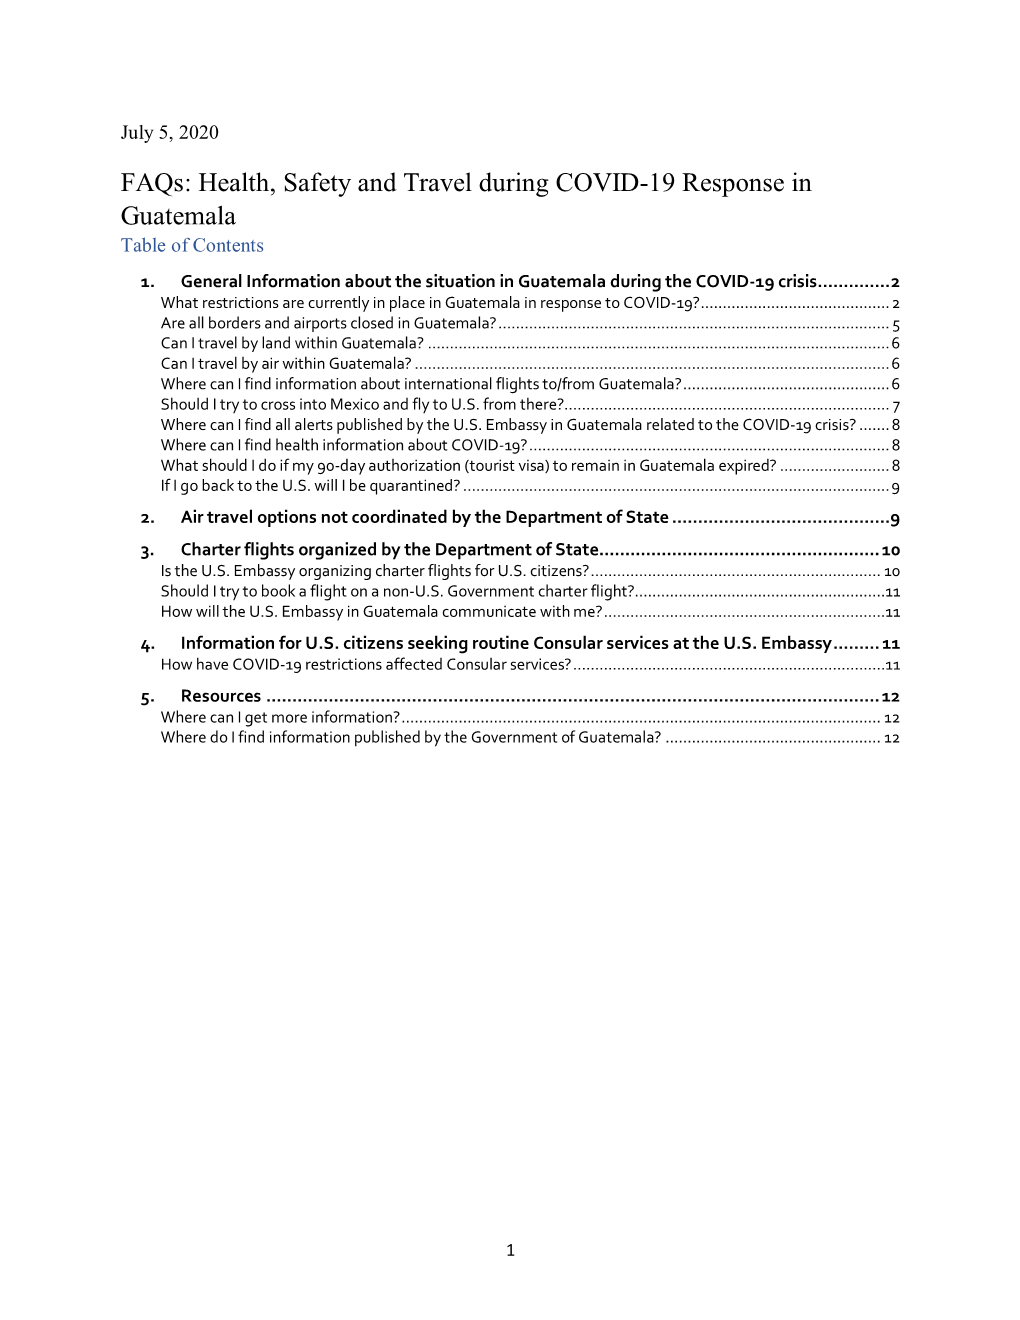 Faqs: Health, Safety and Travel During COVID-19 Response in Guatemala Table of Contents 1